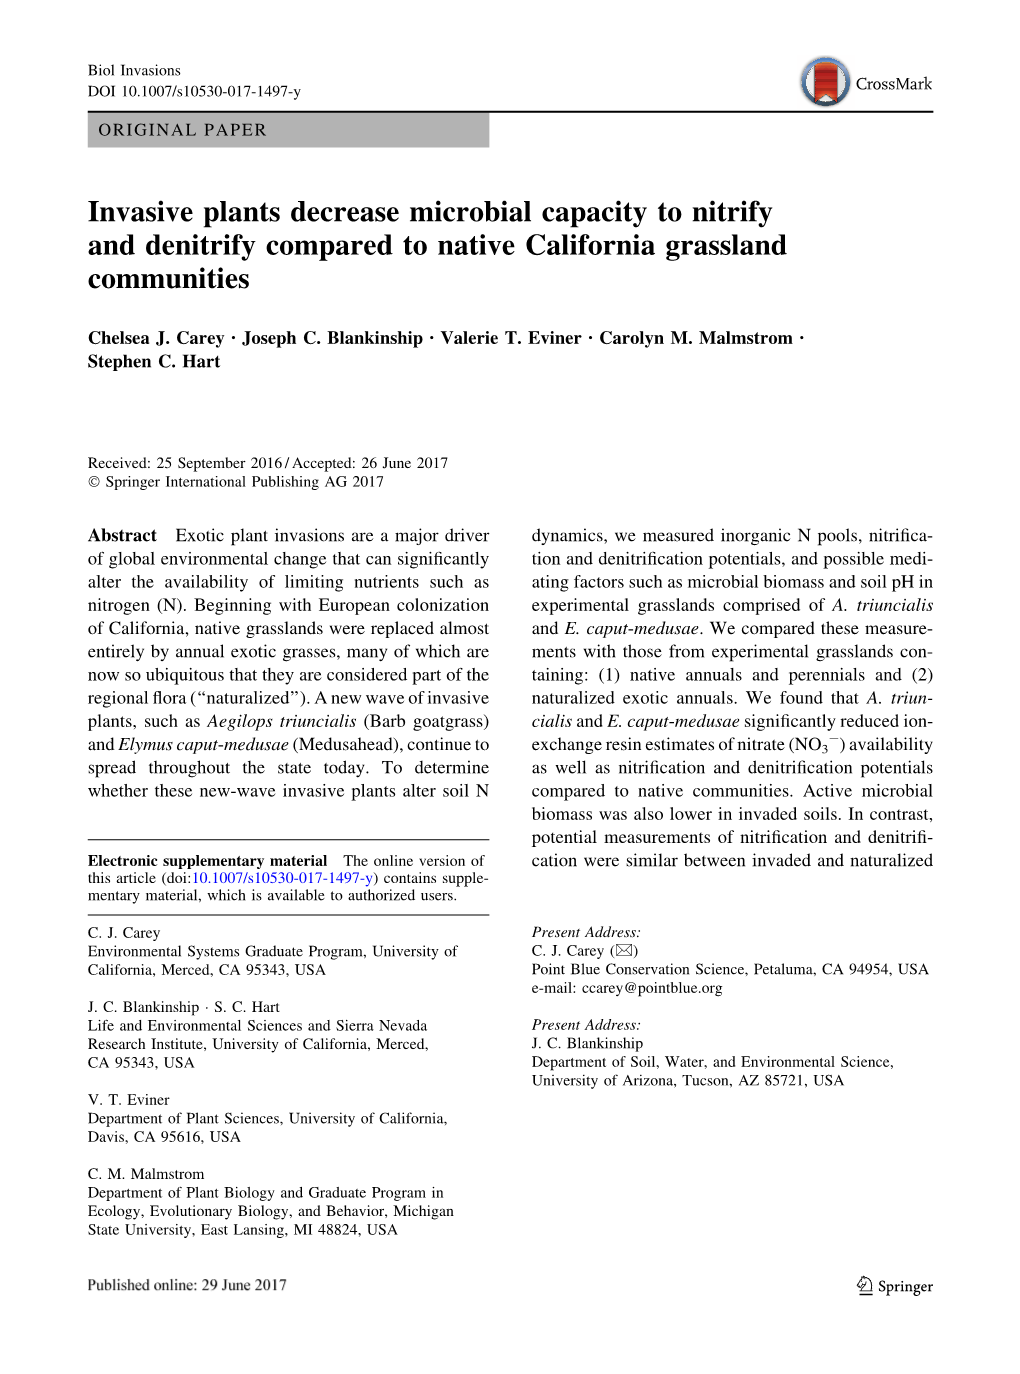 Invasive Plants Decrease Microbial Capacity to Nitrify and Denitrify Compared to Native California Grassland Communities